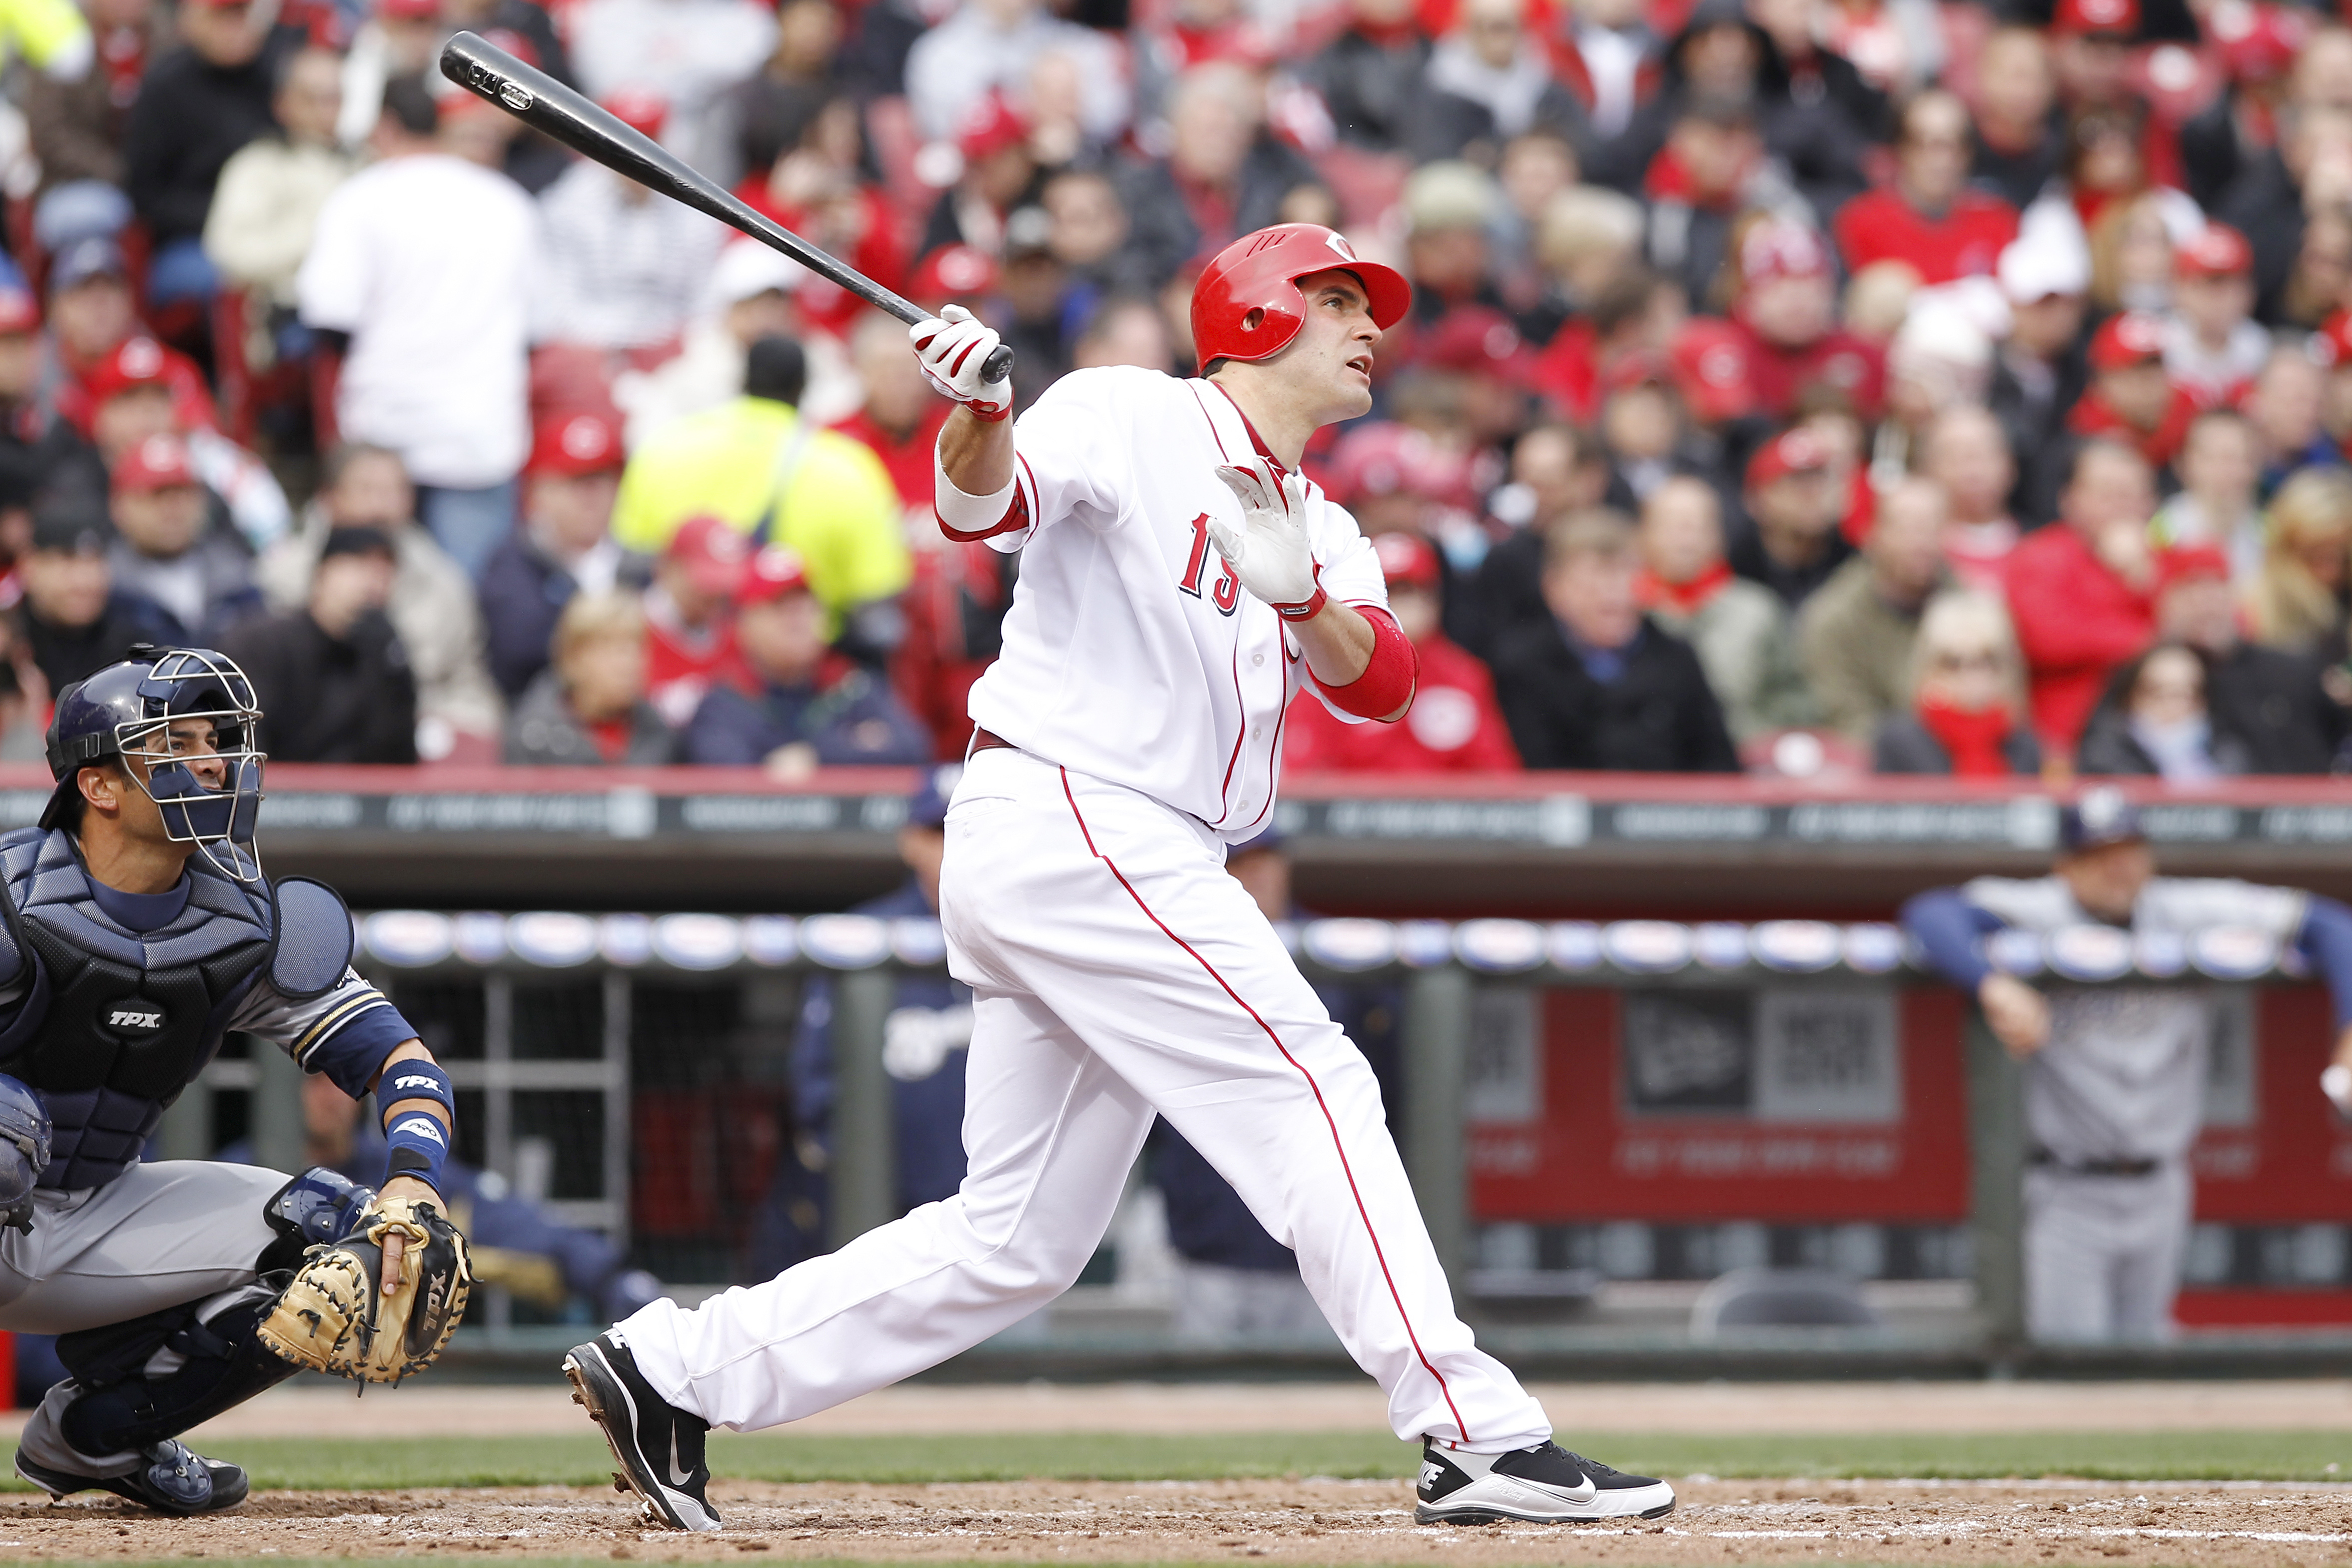 CINCINNATI, OH - MARCH 31: Joey Votto #19 of the Cincinnati Reds hits a home run in the seventh inning against the Milwaukee Brewers in the opening day game at Great American Ballpark on March 31, 2011 in Cincinnati, Ohio. The Reds won 7-6. (Photo by Joe 